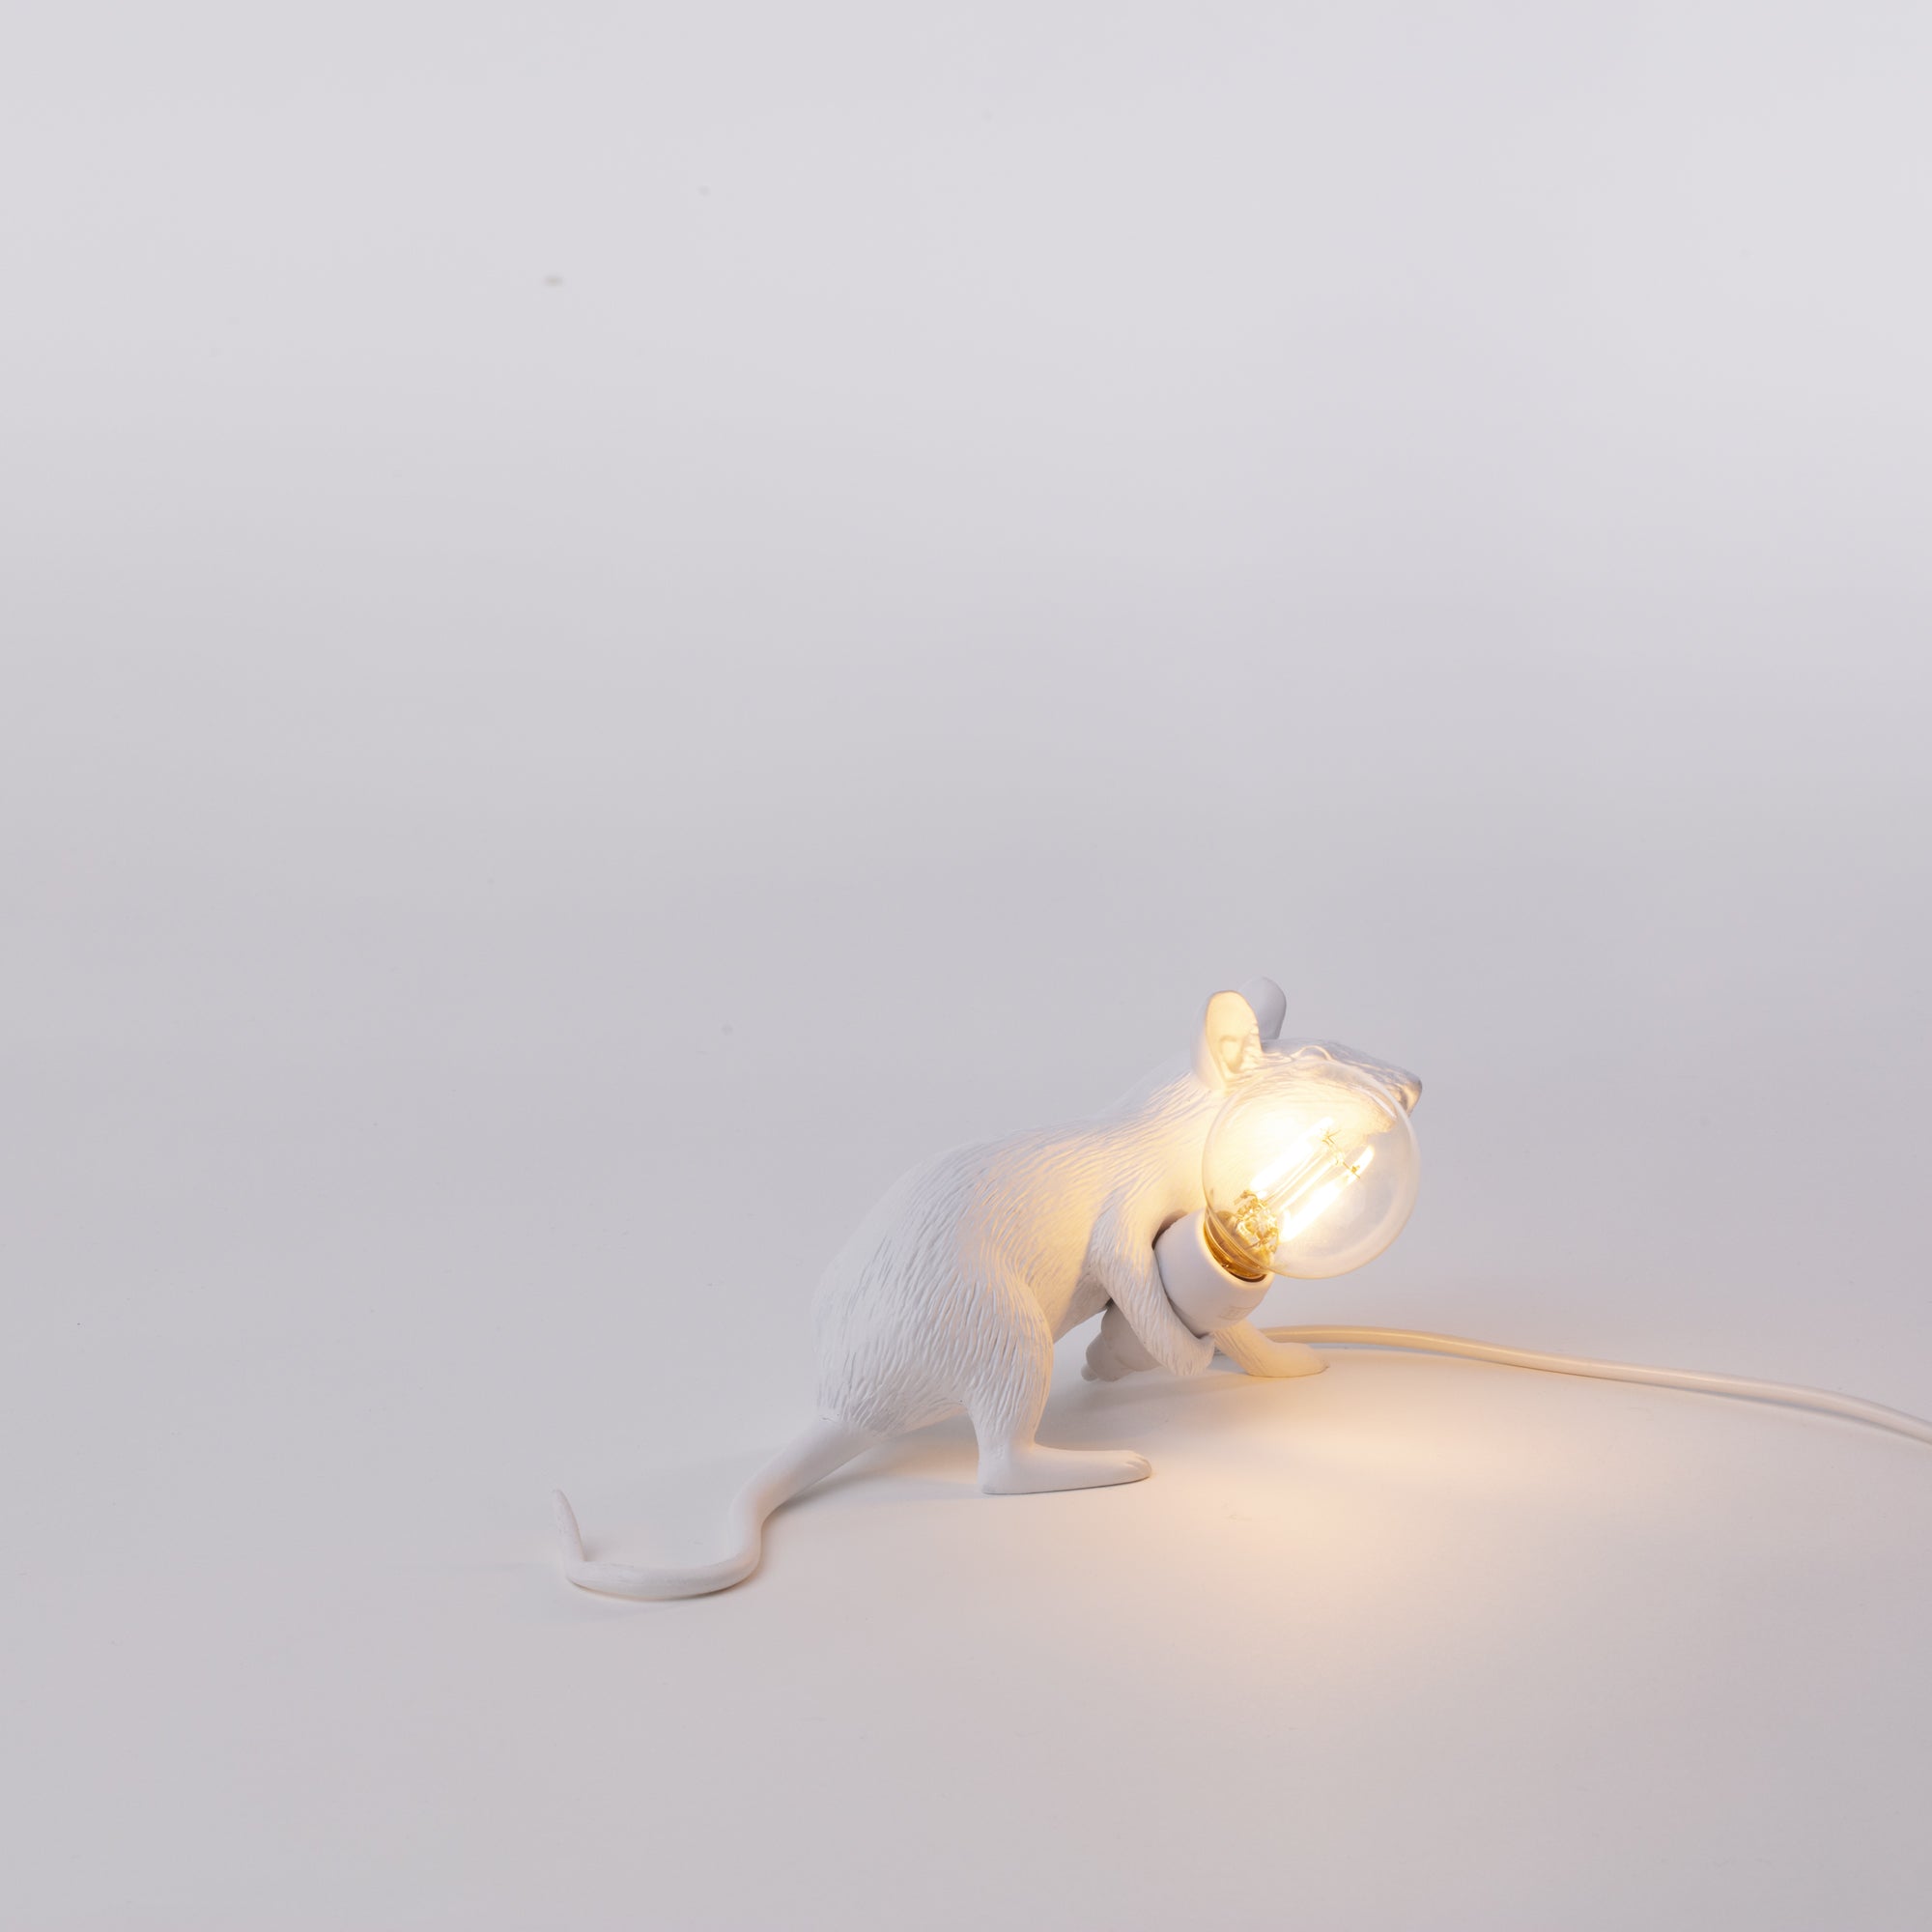 Seletti Mouse Lamp Harzlampe - liegende Maus